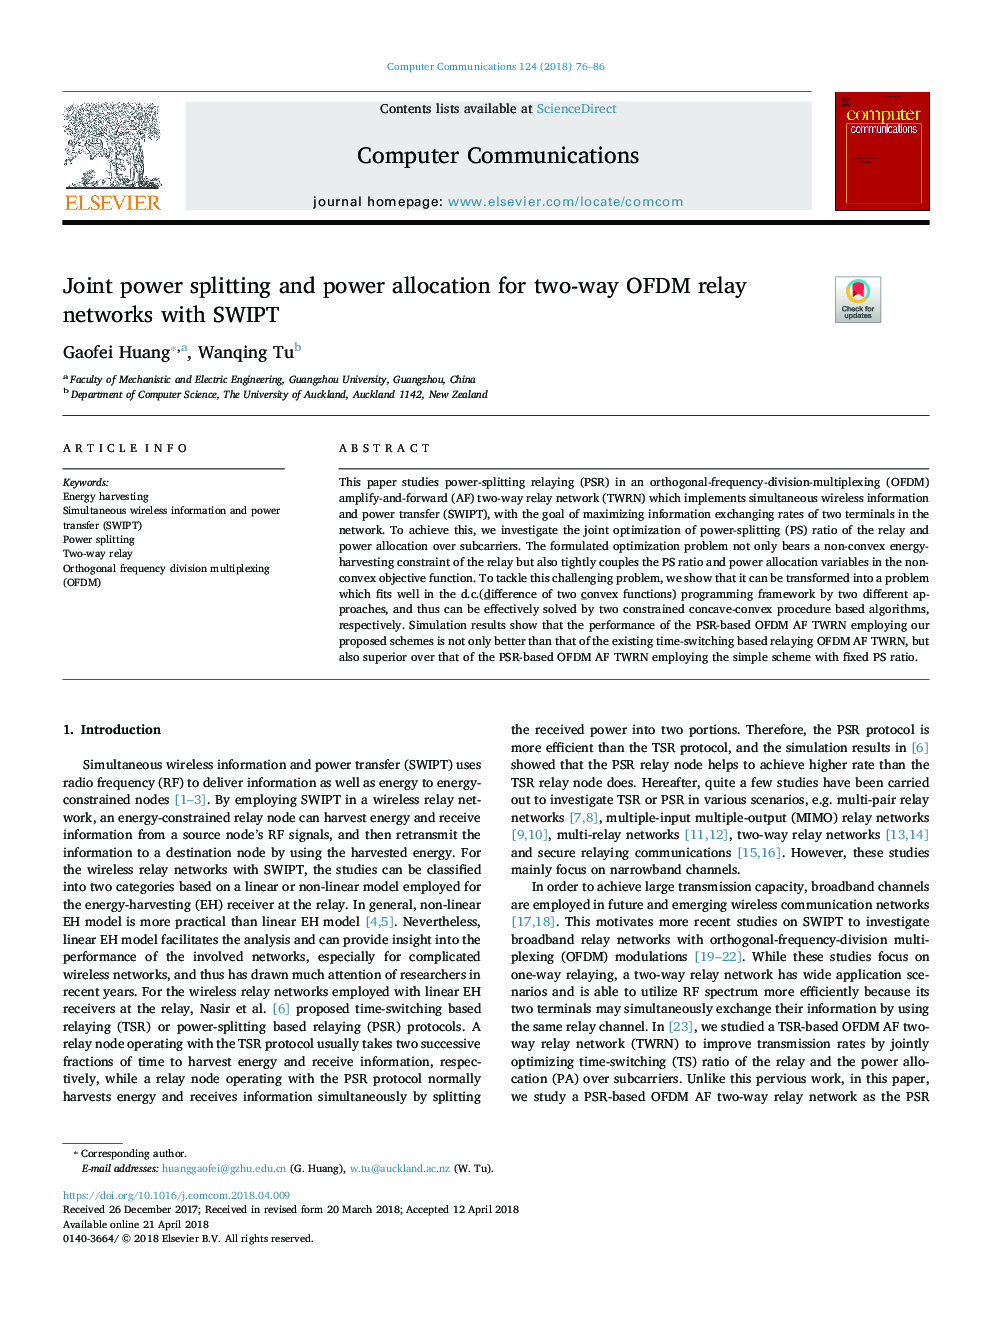 Joint power splitting and power allocation for two-way OFDM relay networks with SWIPT